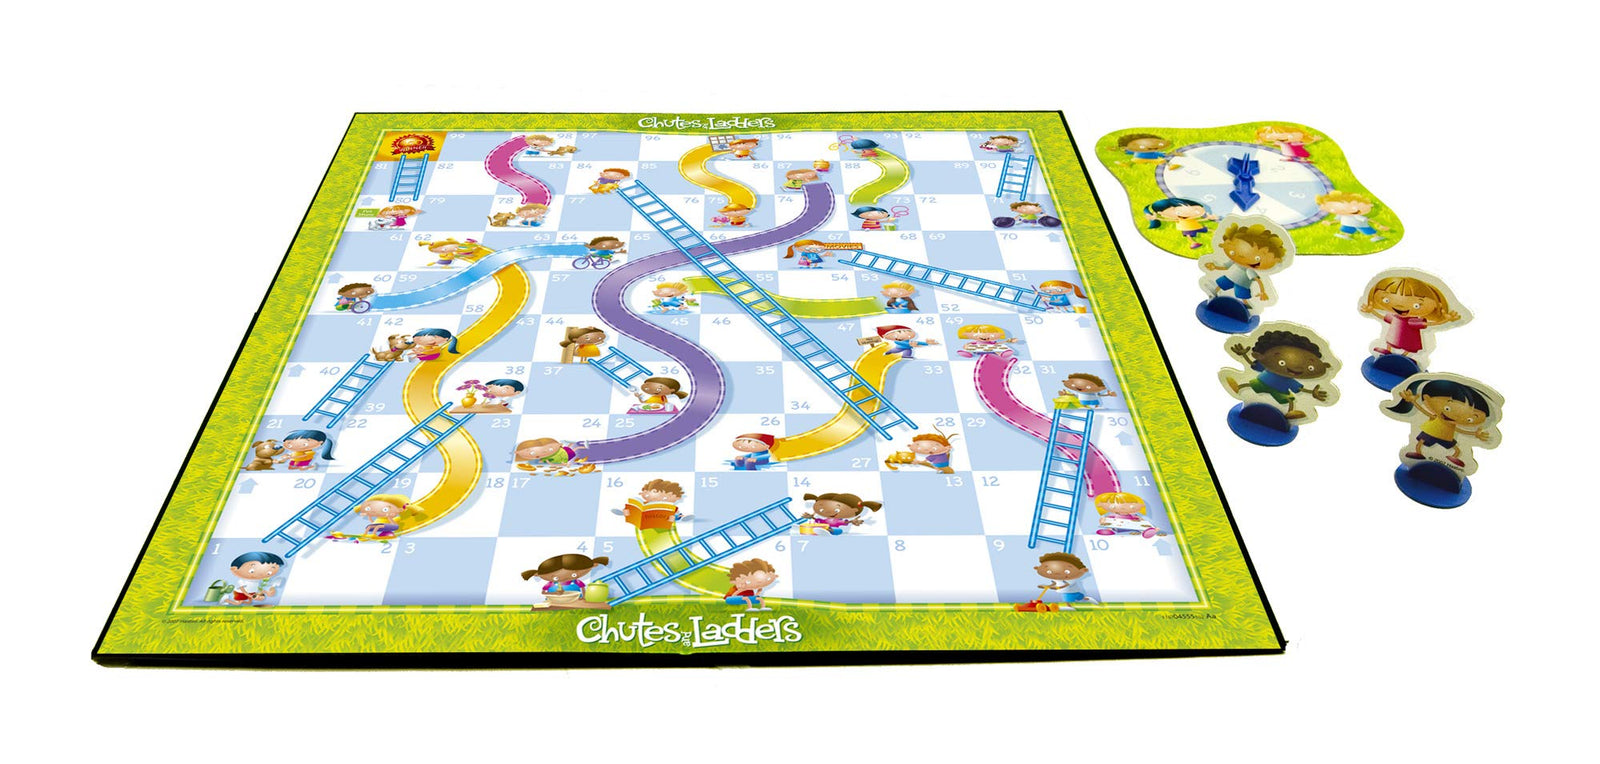 Chutes and Ladders Game (Amazon Exclusive)